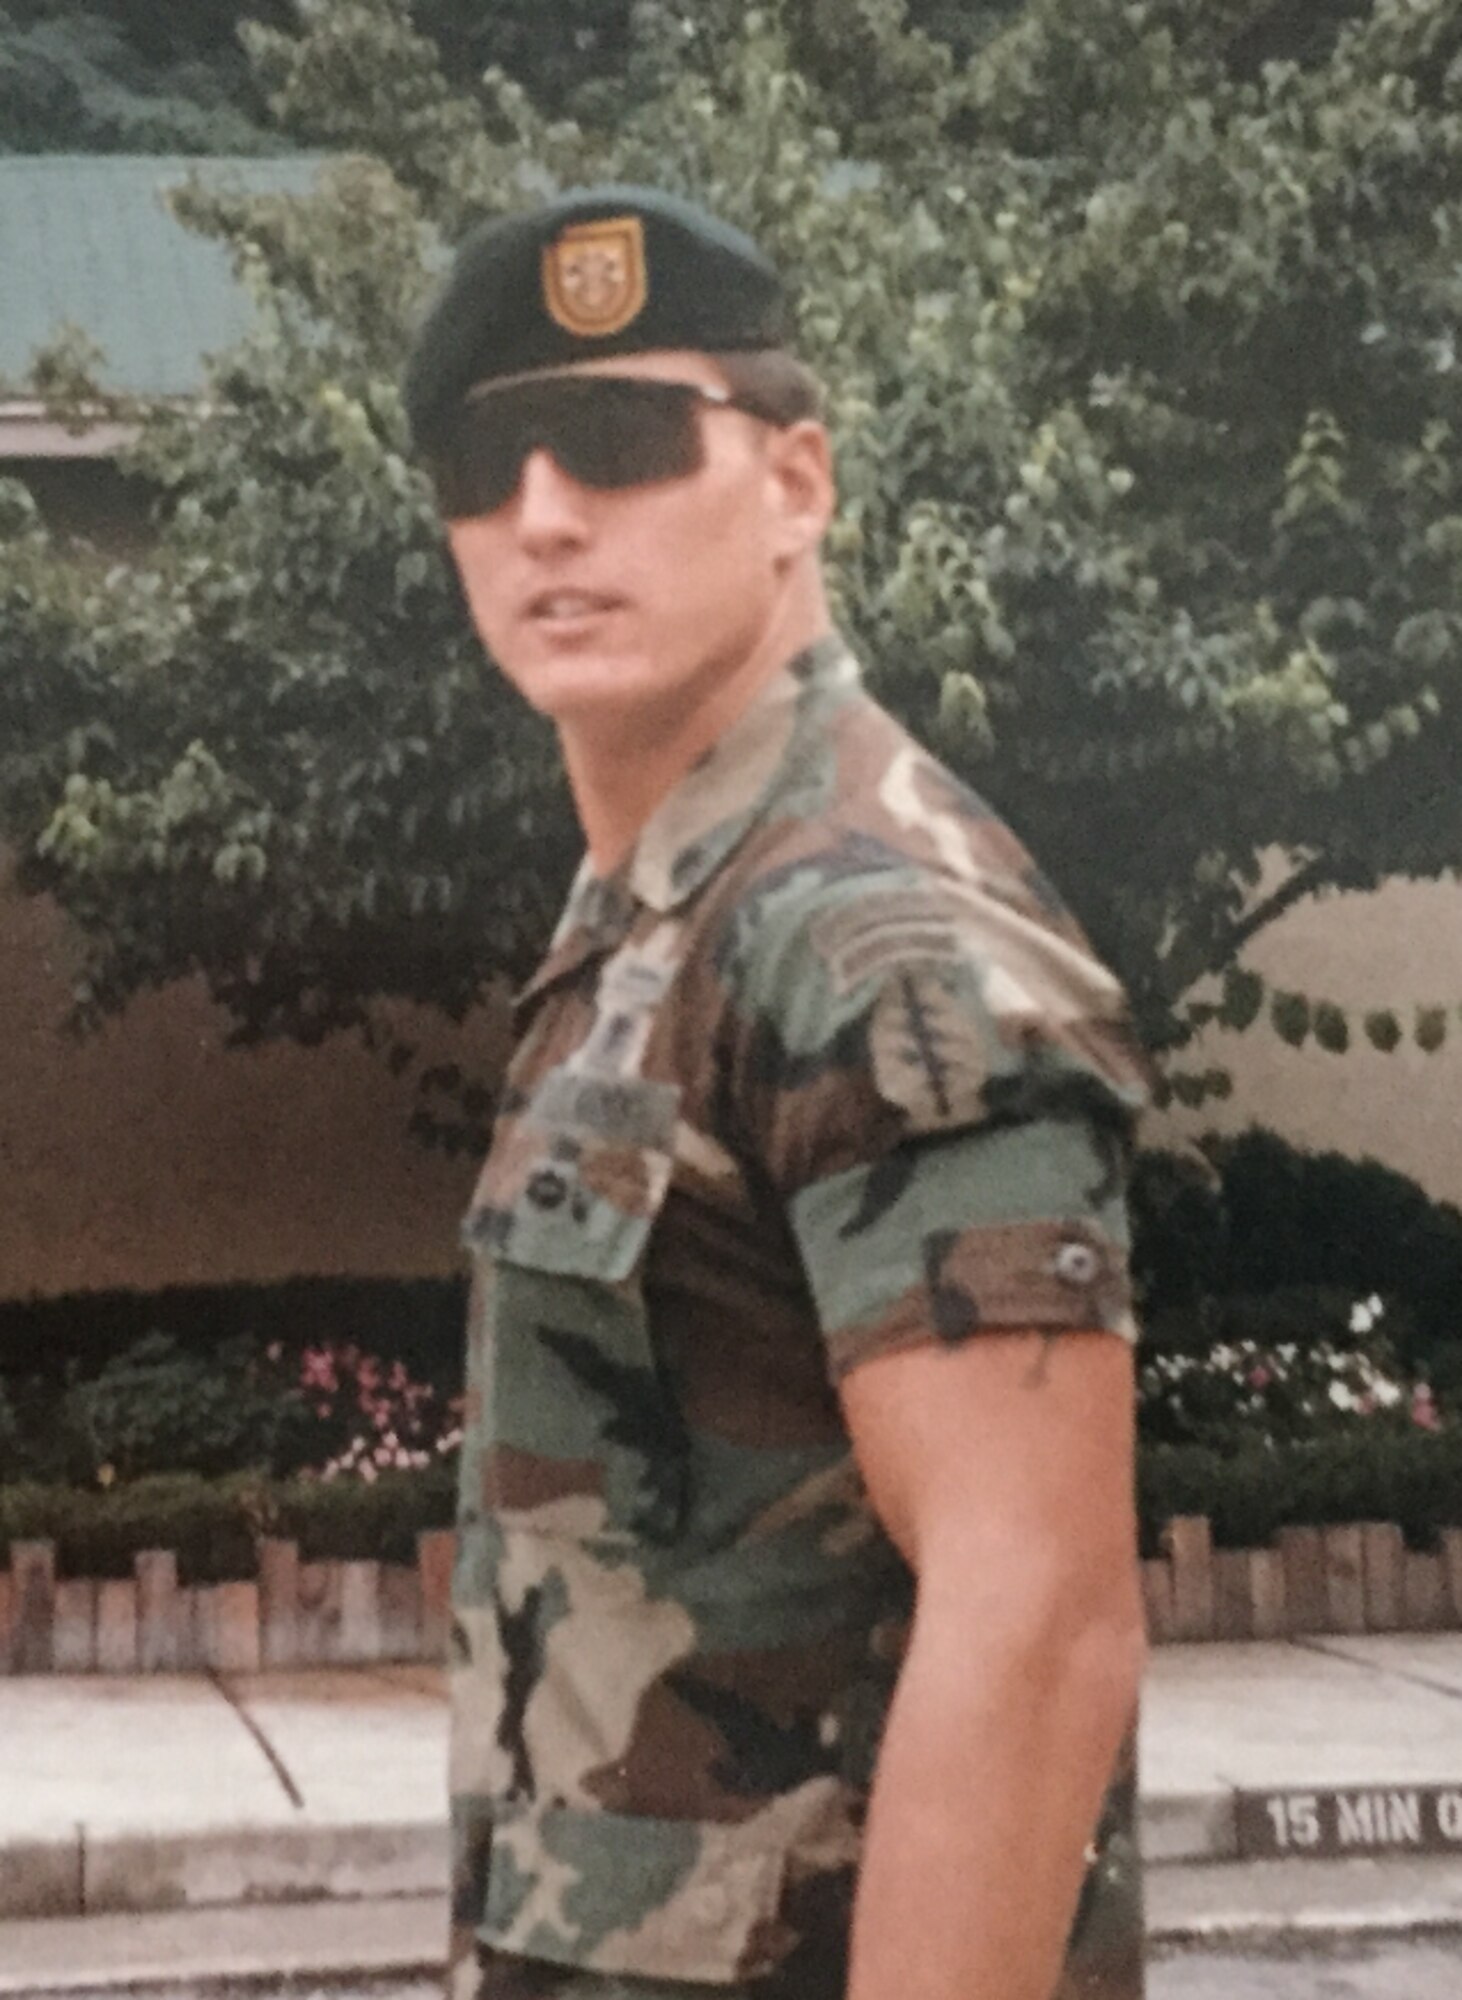 Now-Air Force Lt. Col. Robert Heil, 422nd Medical Squadron commander, poses for a photo during his prior career as an Army Special Forces medic. Heil served 12 years in the Army before transitioning to the Air Force. (Courtesy photo)